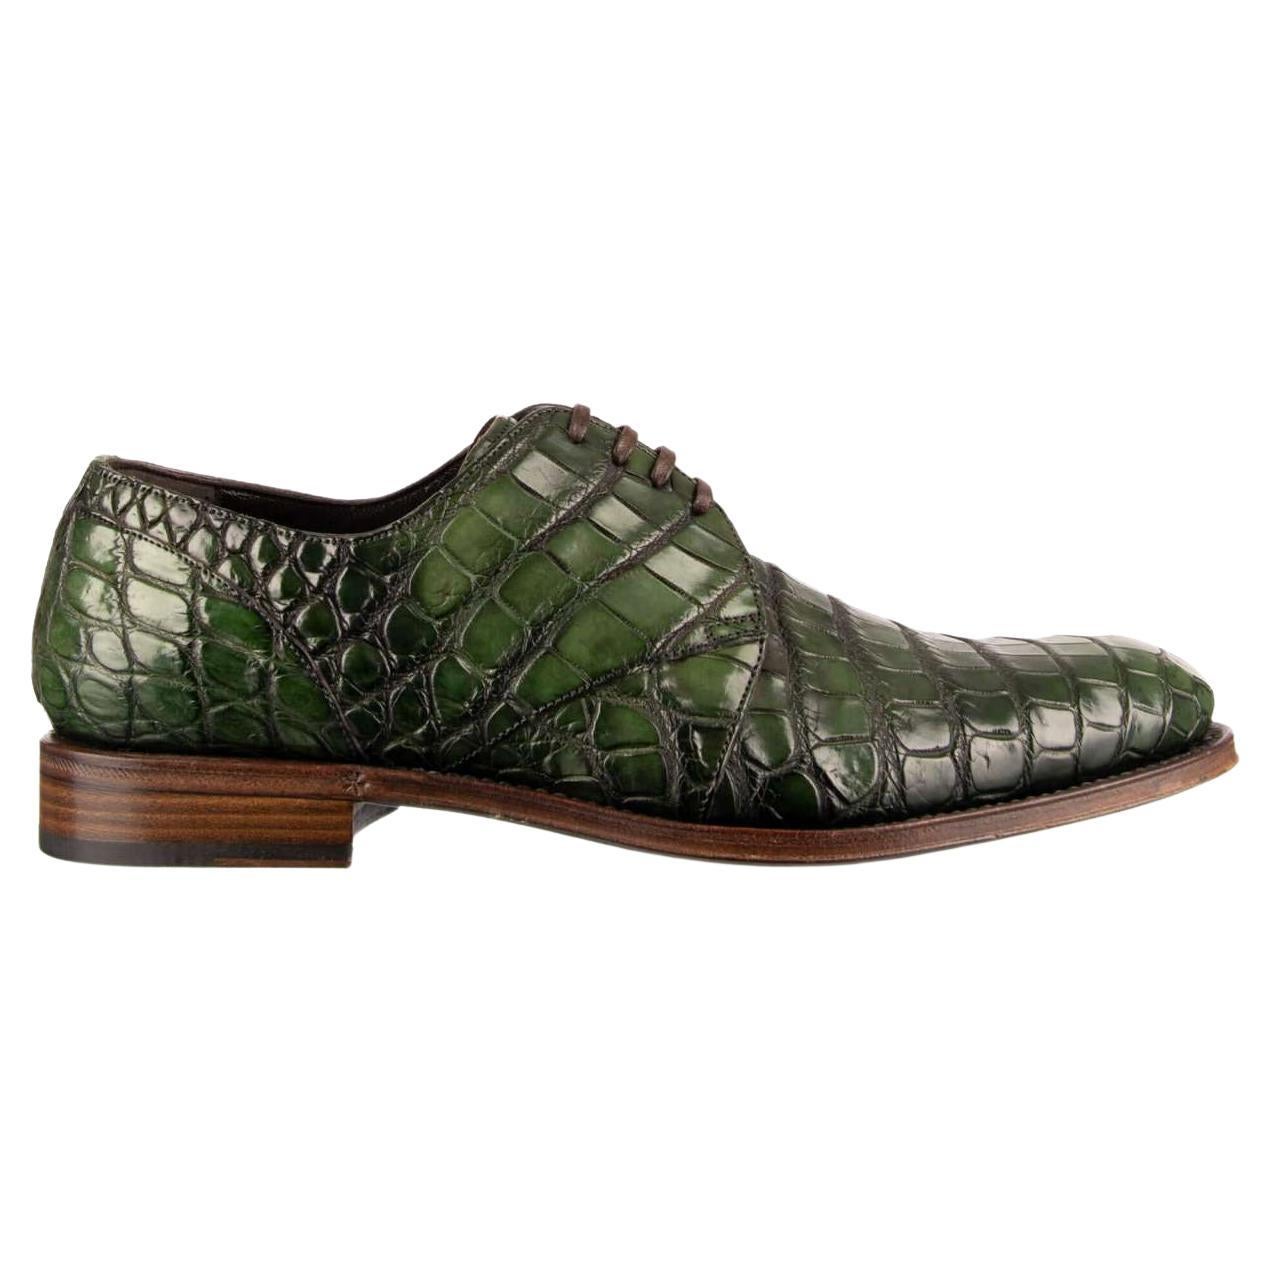 Dolce & Gabbana Formal Crocodile Leather Shoes NAPOLI Good Year Green EUR 39 For Sale